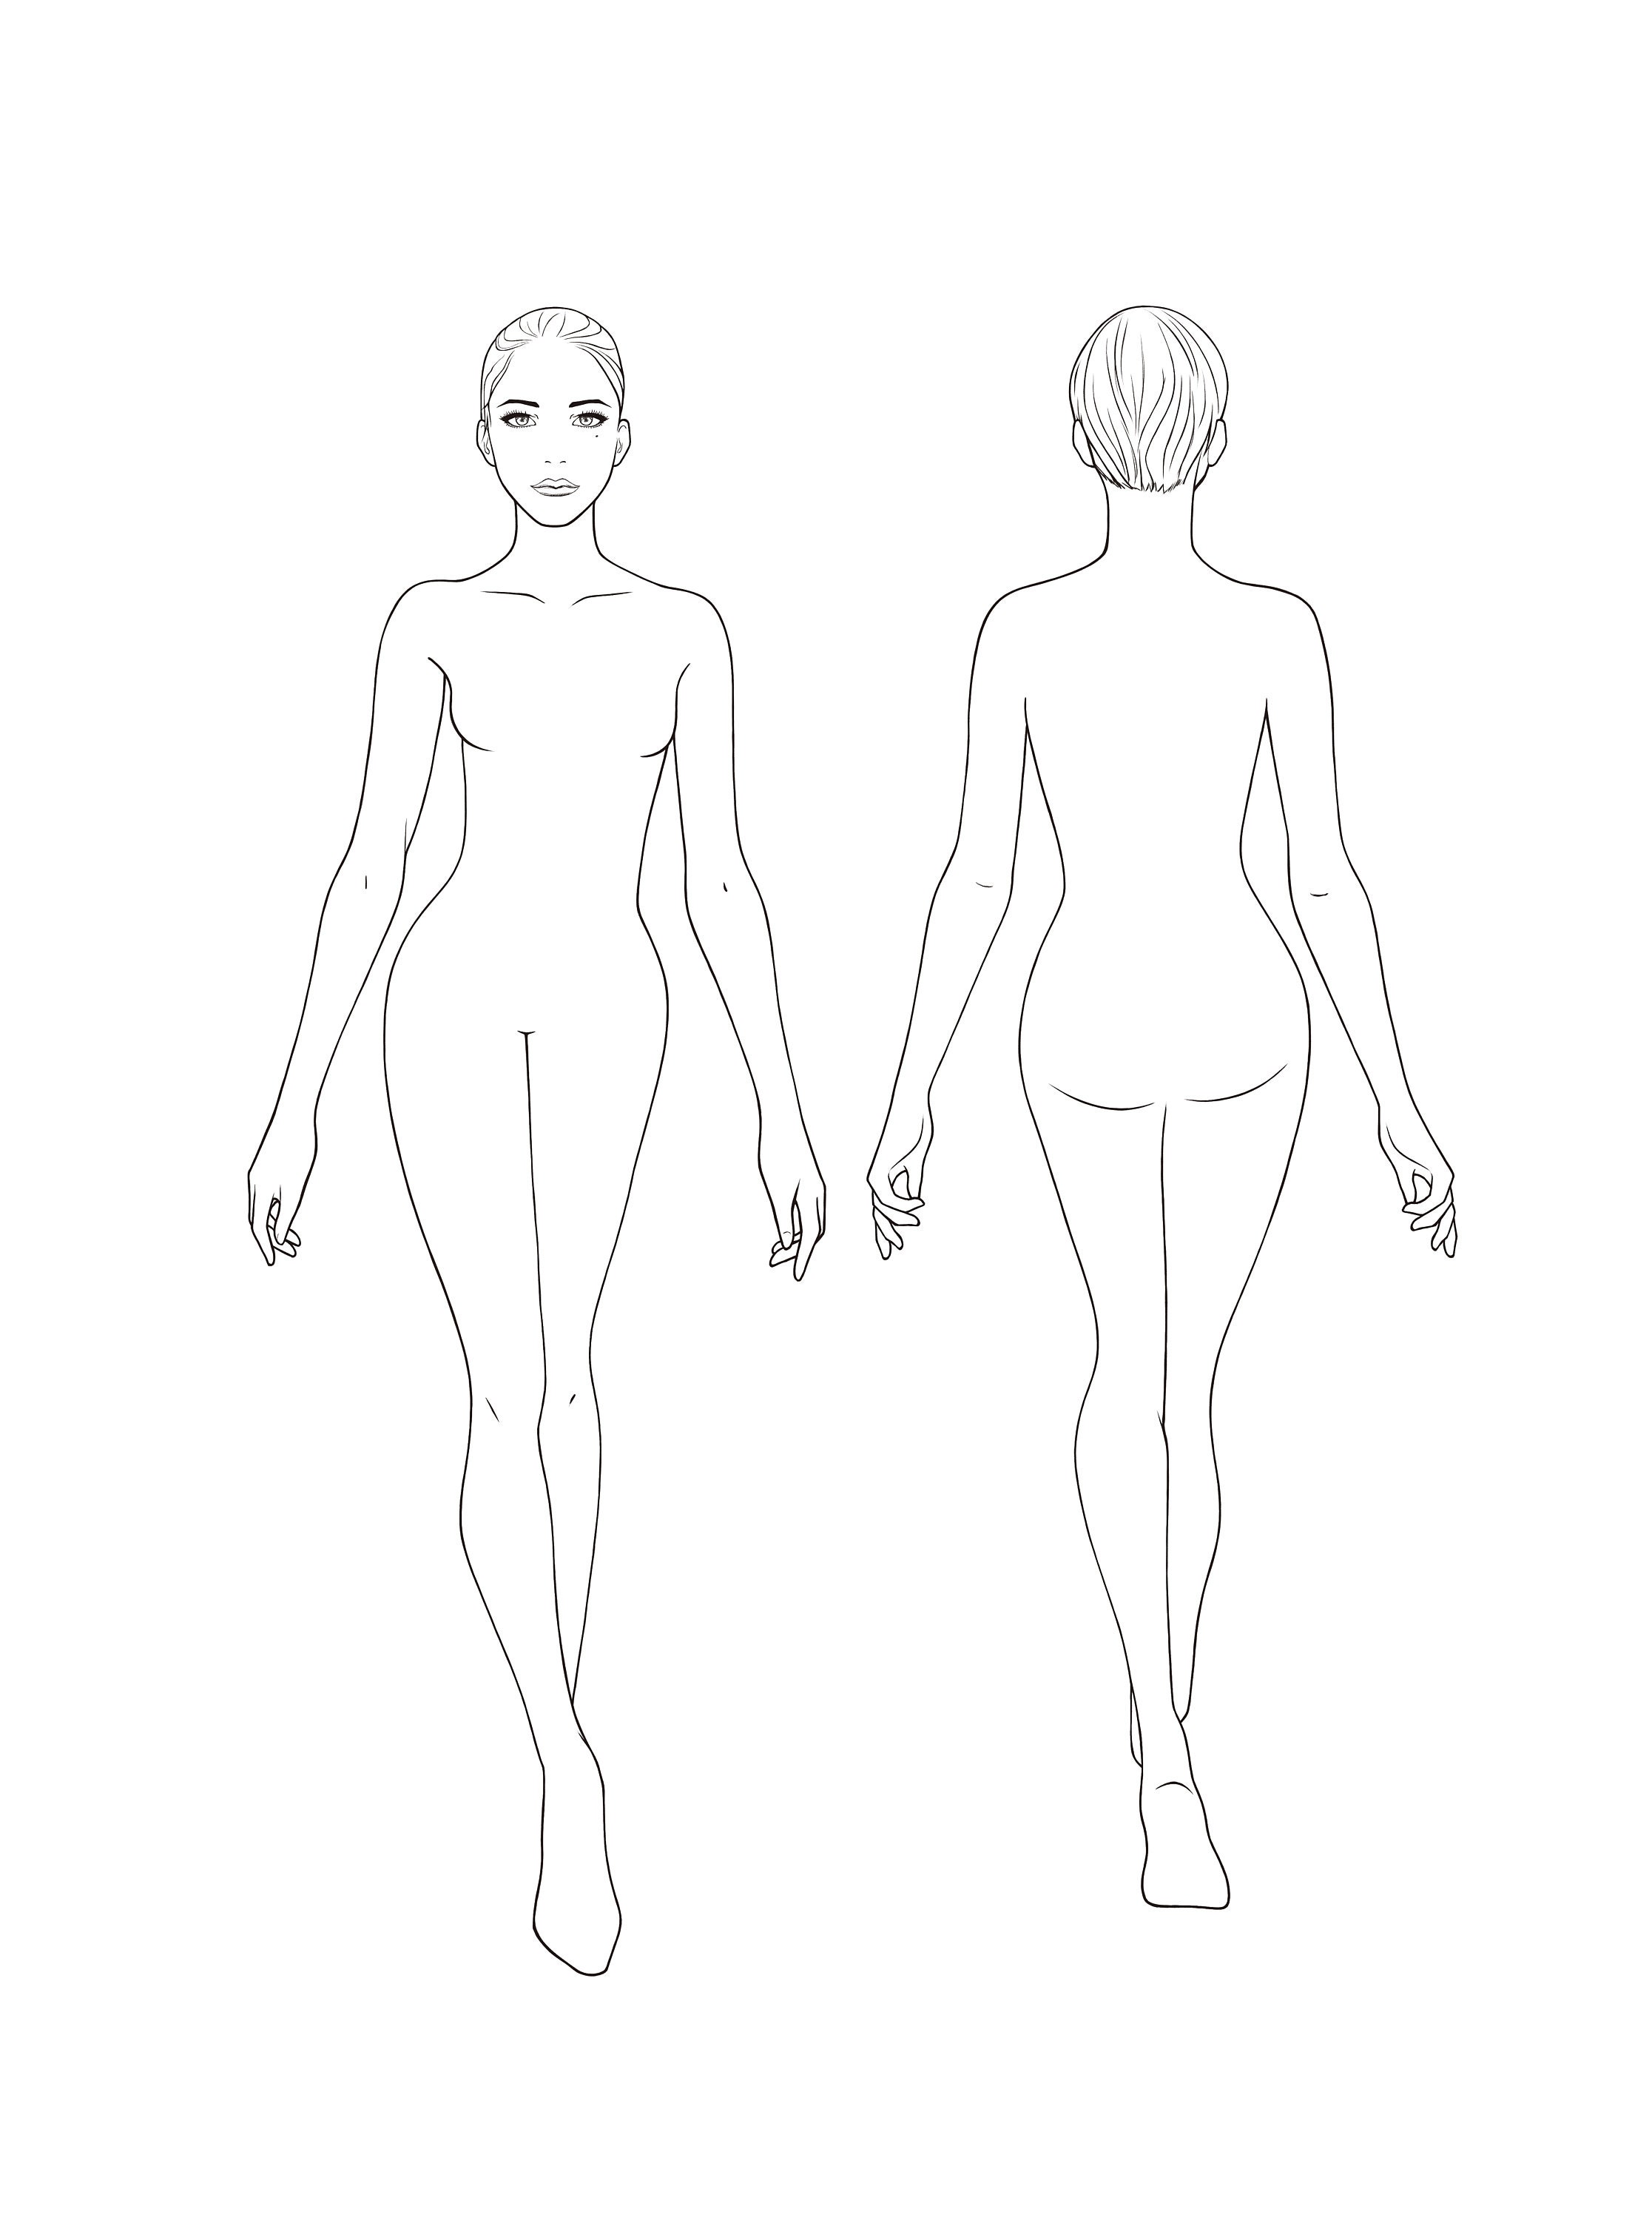 Fashion figure templates: The ultimate list for your next fashion project